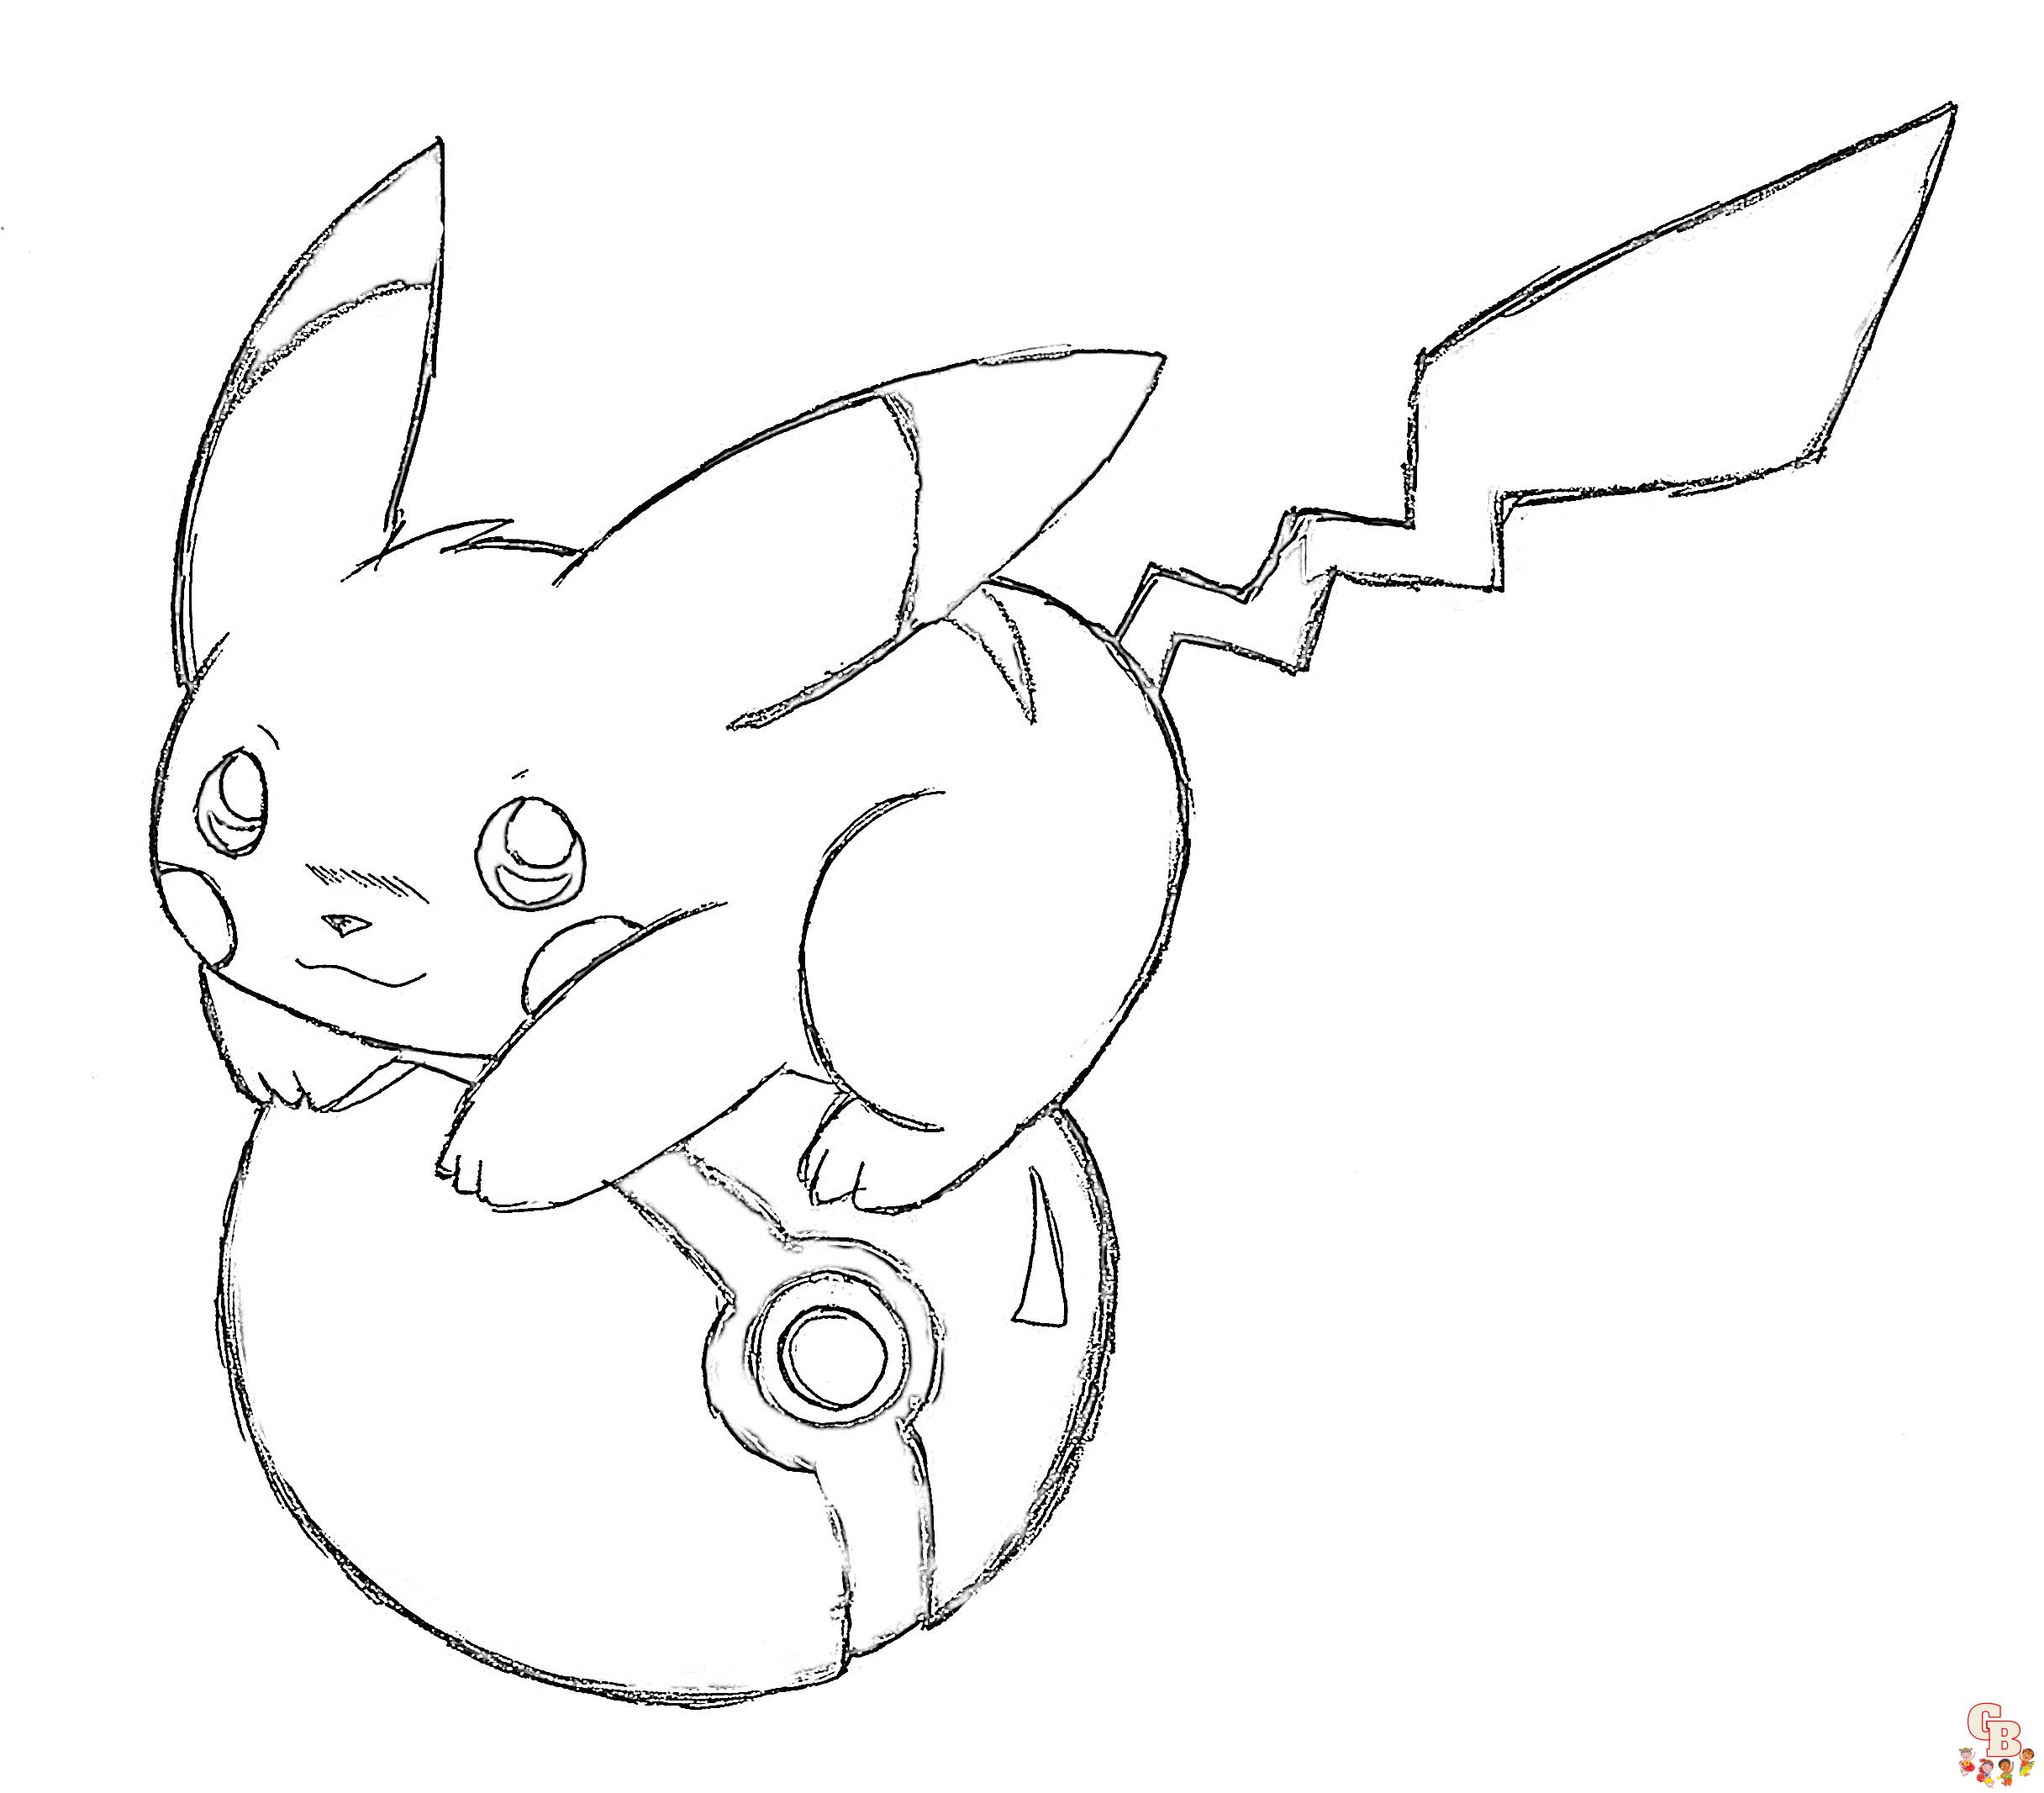 Pokemon Ball Coloring Pages